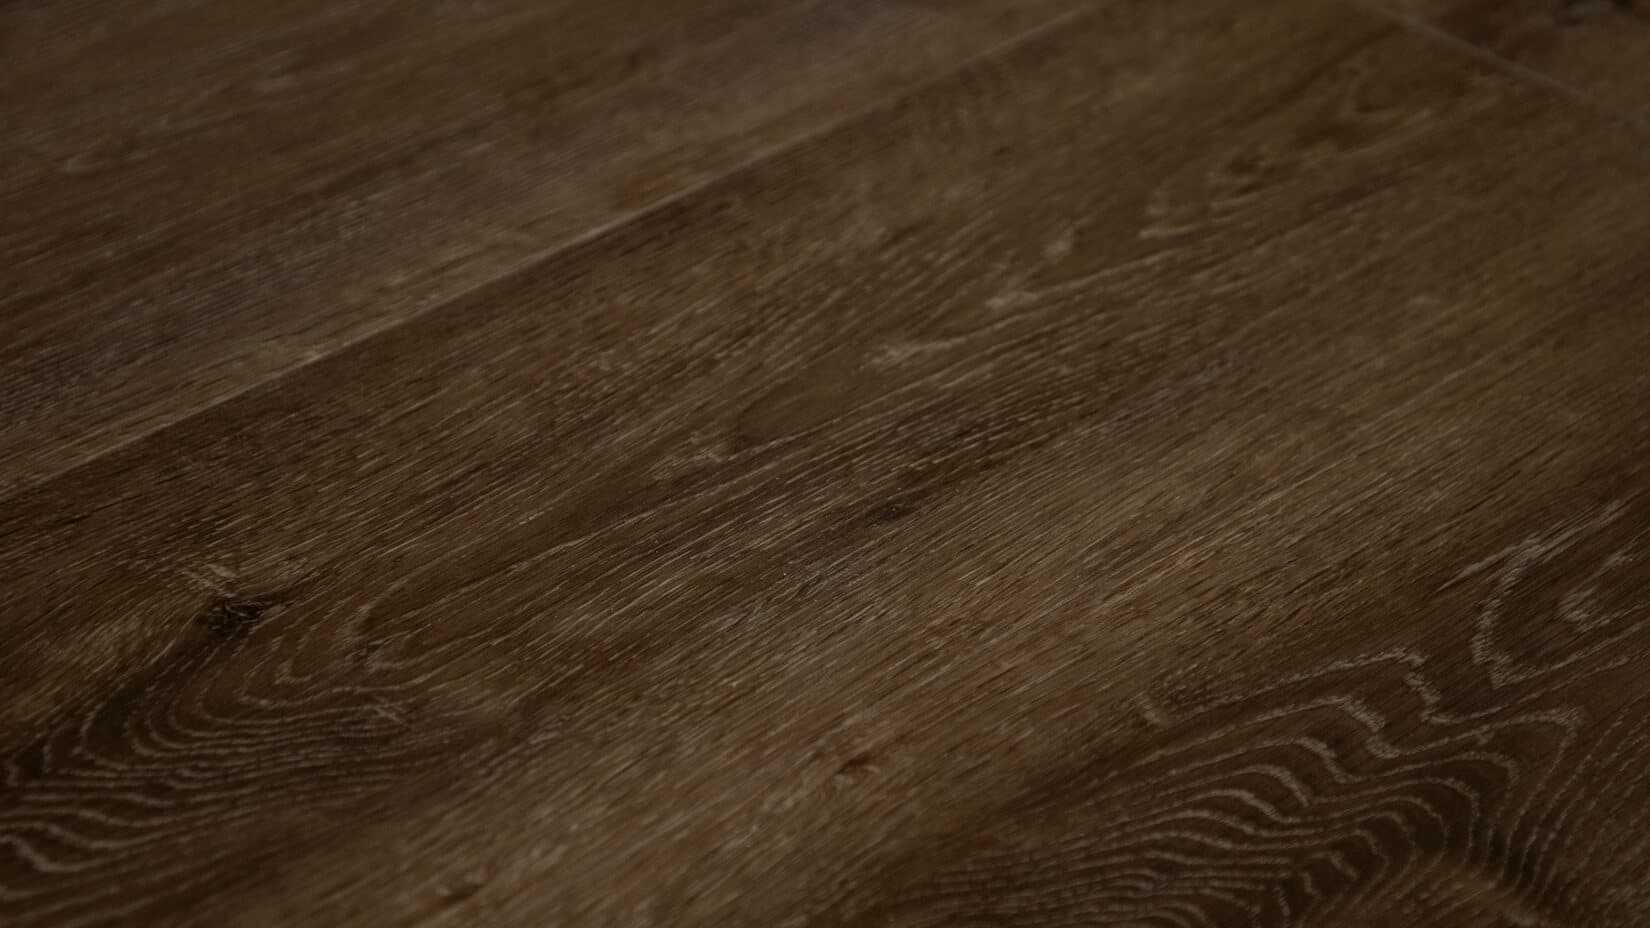 Miracle Collection Falcon Oak 7.25 X 48 by Trends - Quad Cities -  Floorcrafters